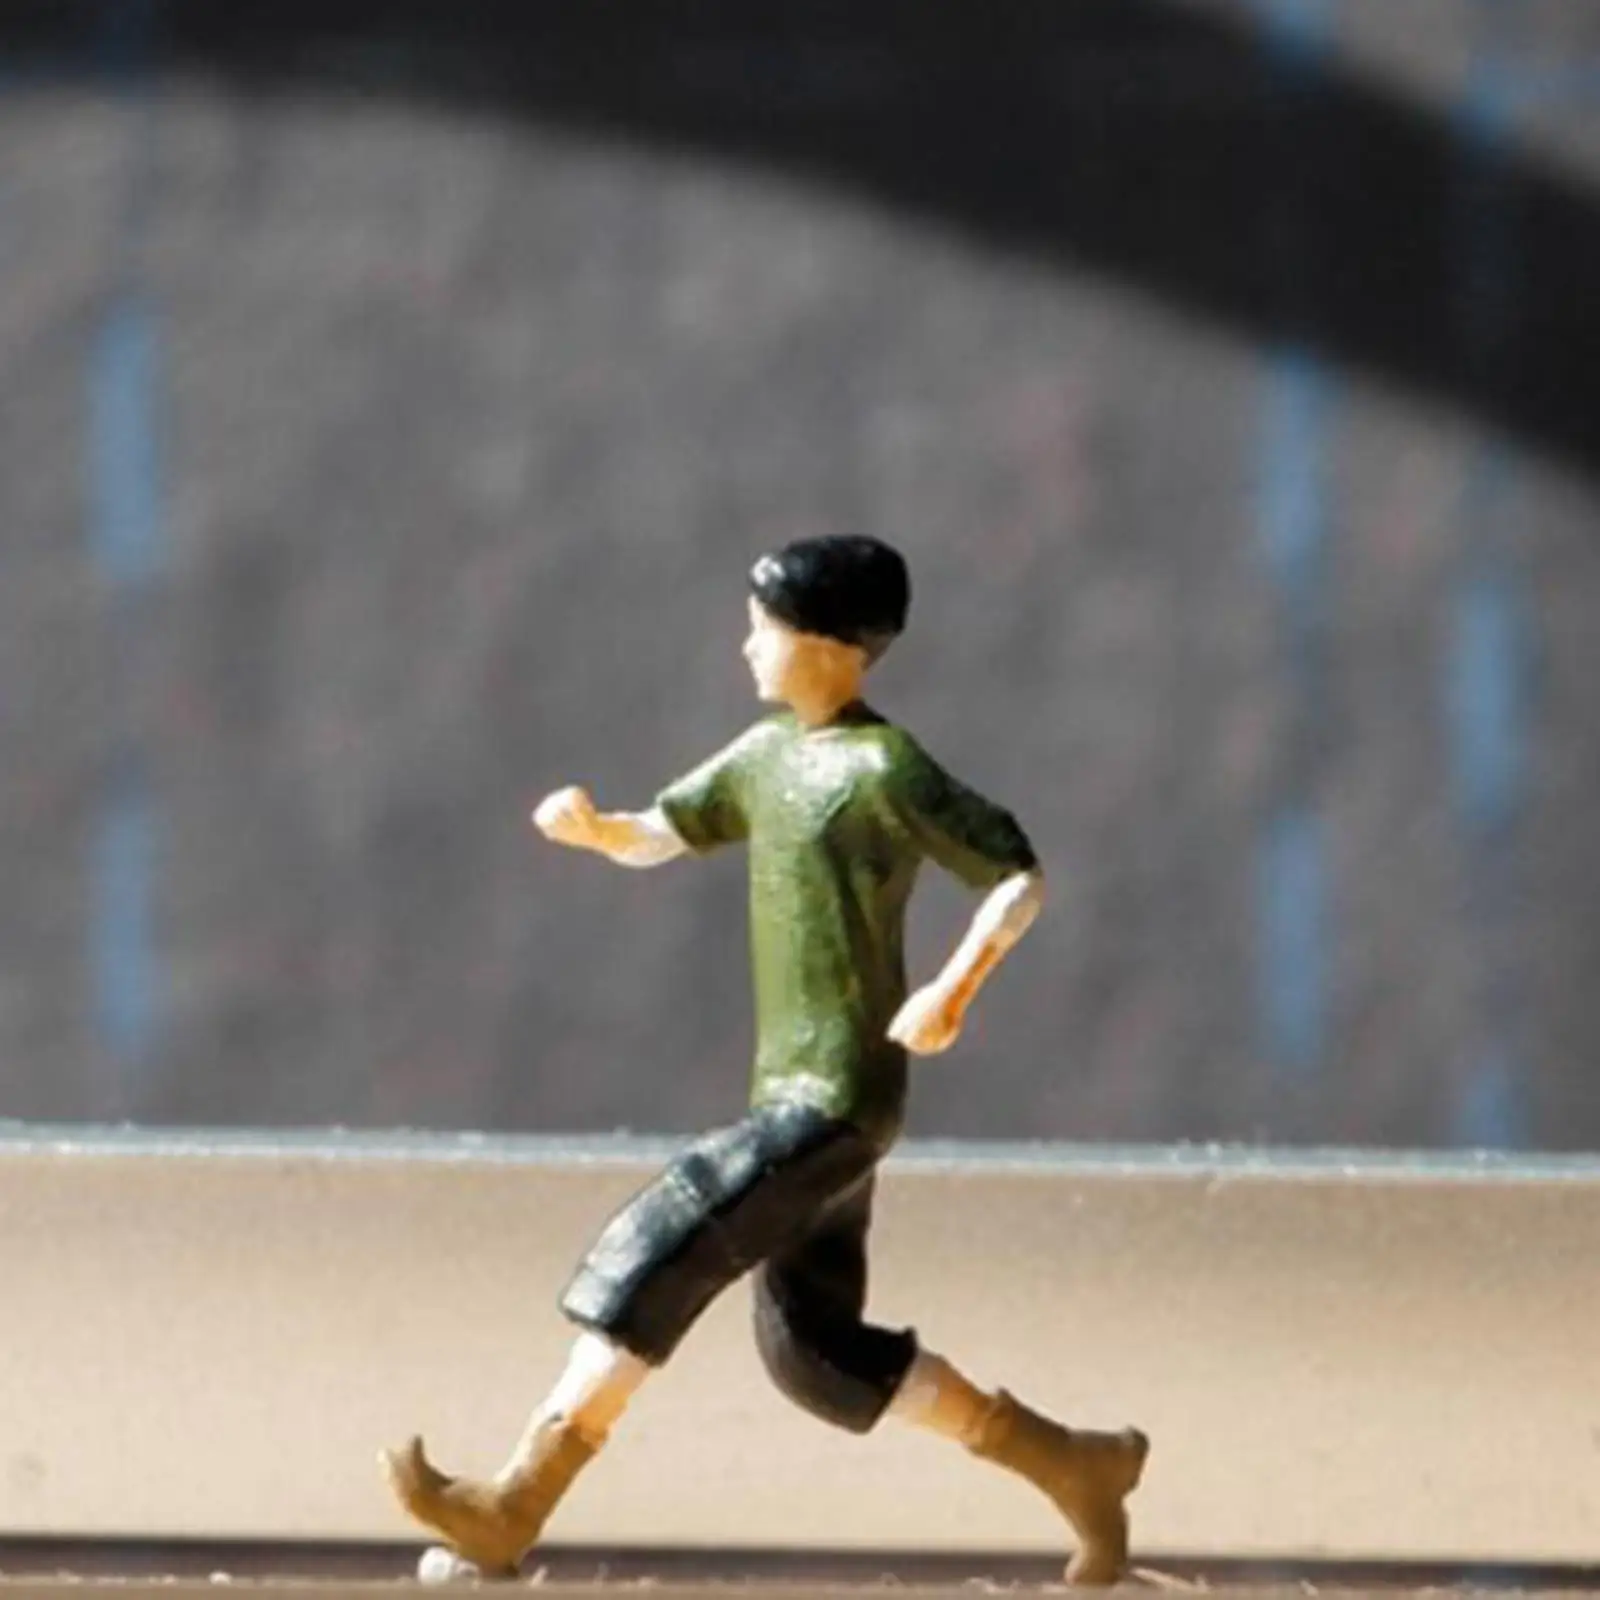 Miniature 1/64 Models People Figures Tiny Running Boy DIY Crafts for Micro Landscapes Sand Table Decor Collectibles Accessories